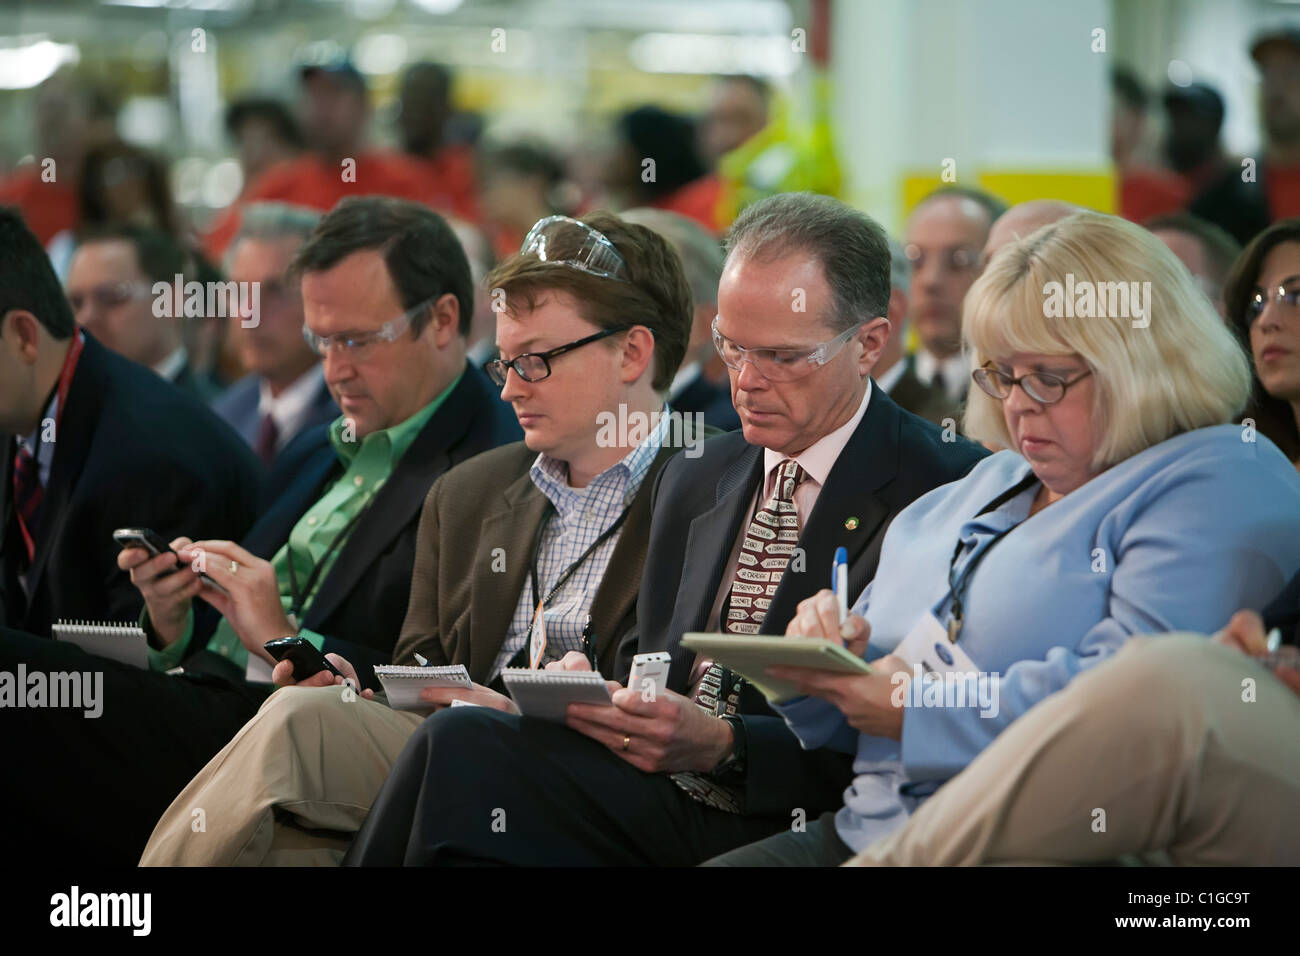 Reporters take notes during speeches by company and union officials at an event celebrating the launch of the 2012 Ford Focus Stock Photo